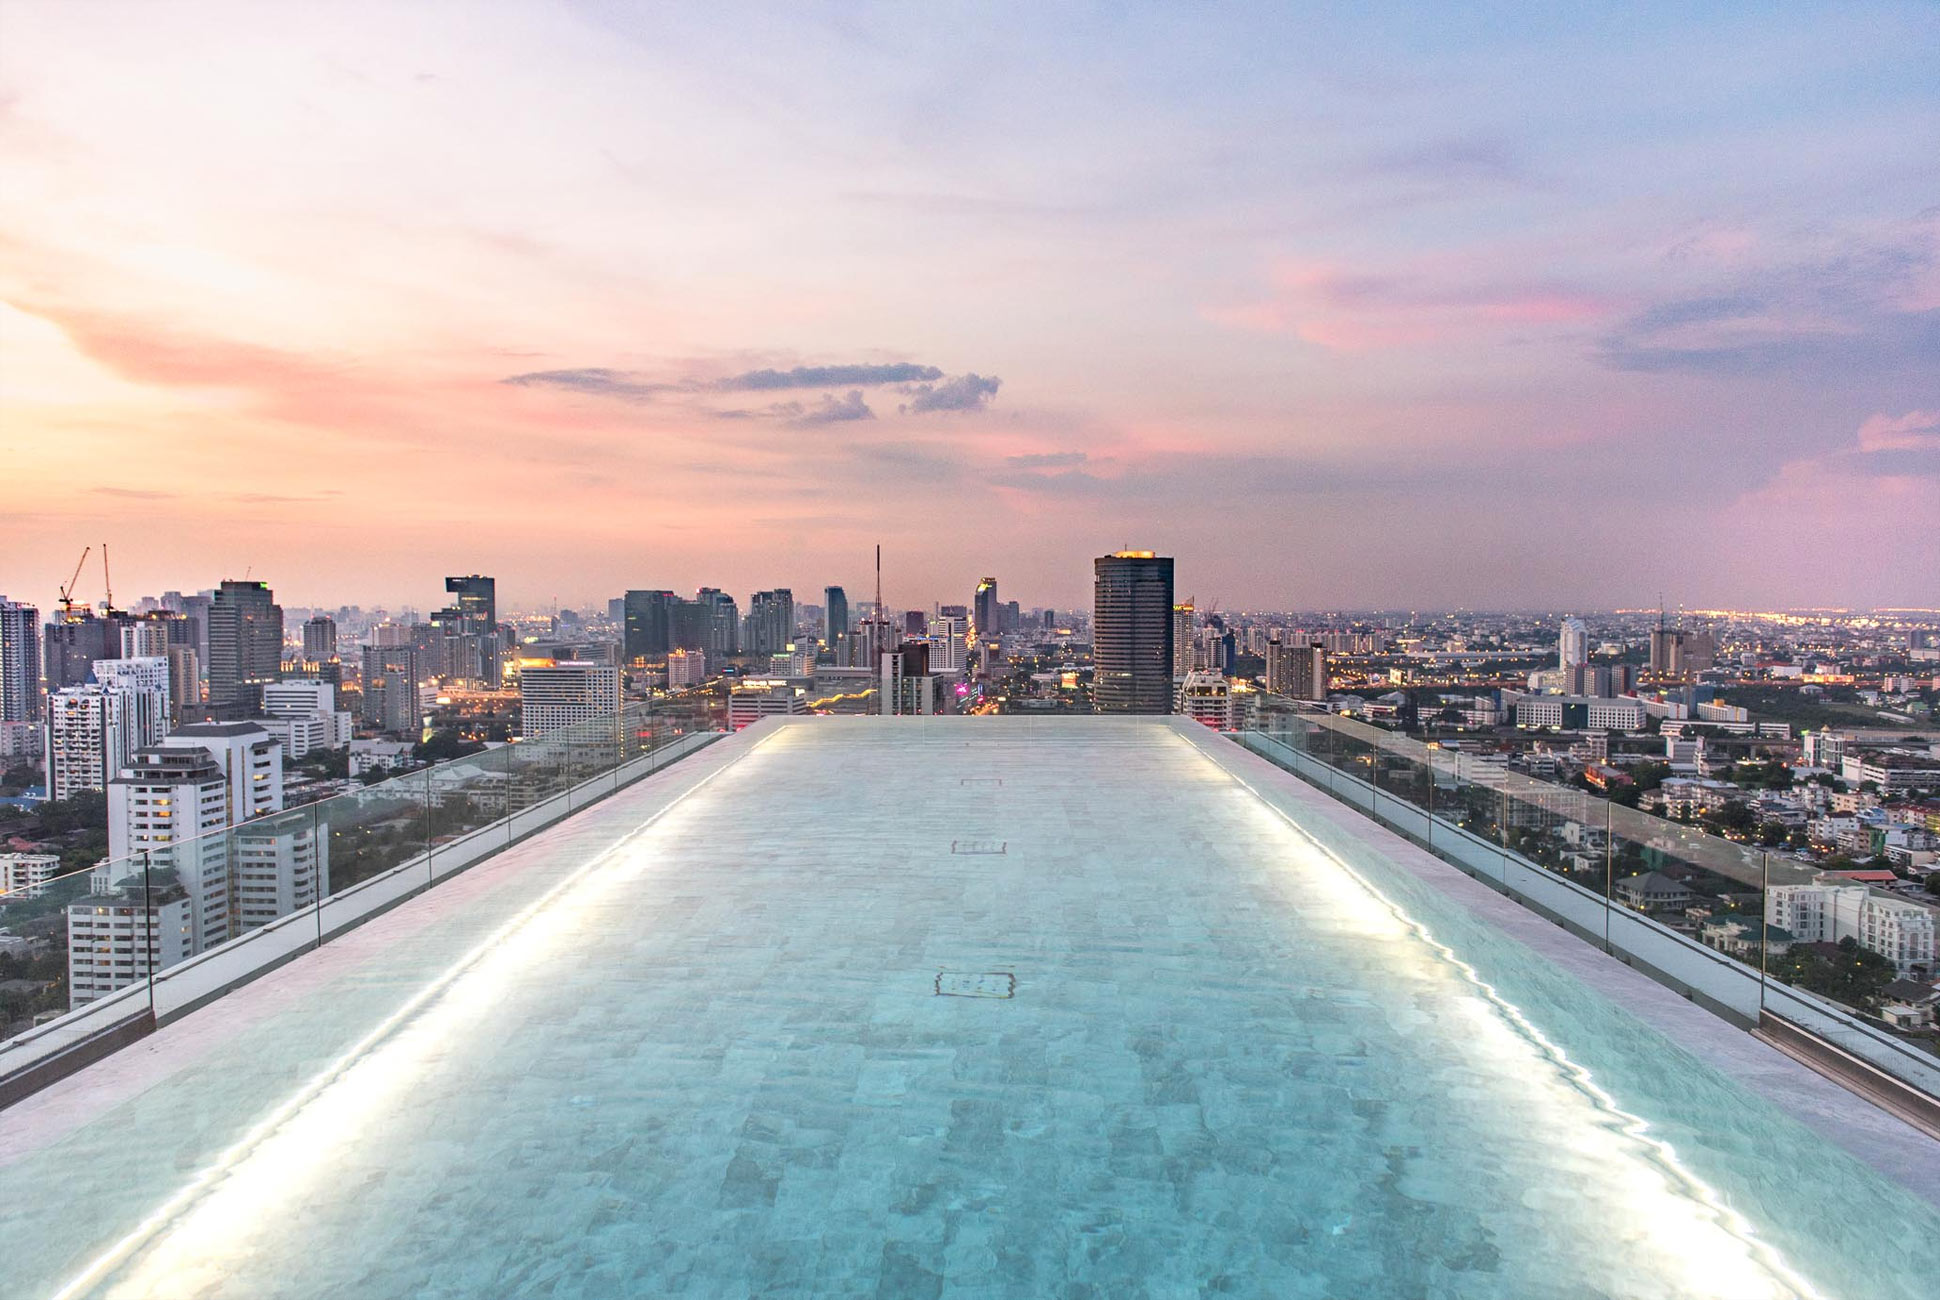 Hotel Swimming Pools in Asia for Your Next Vacation